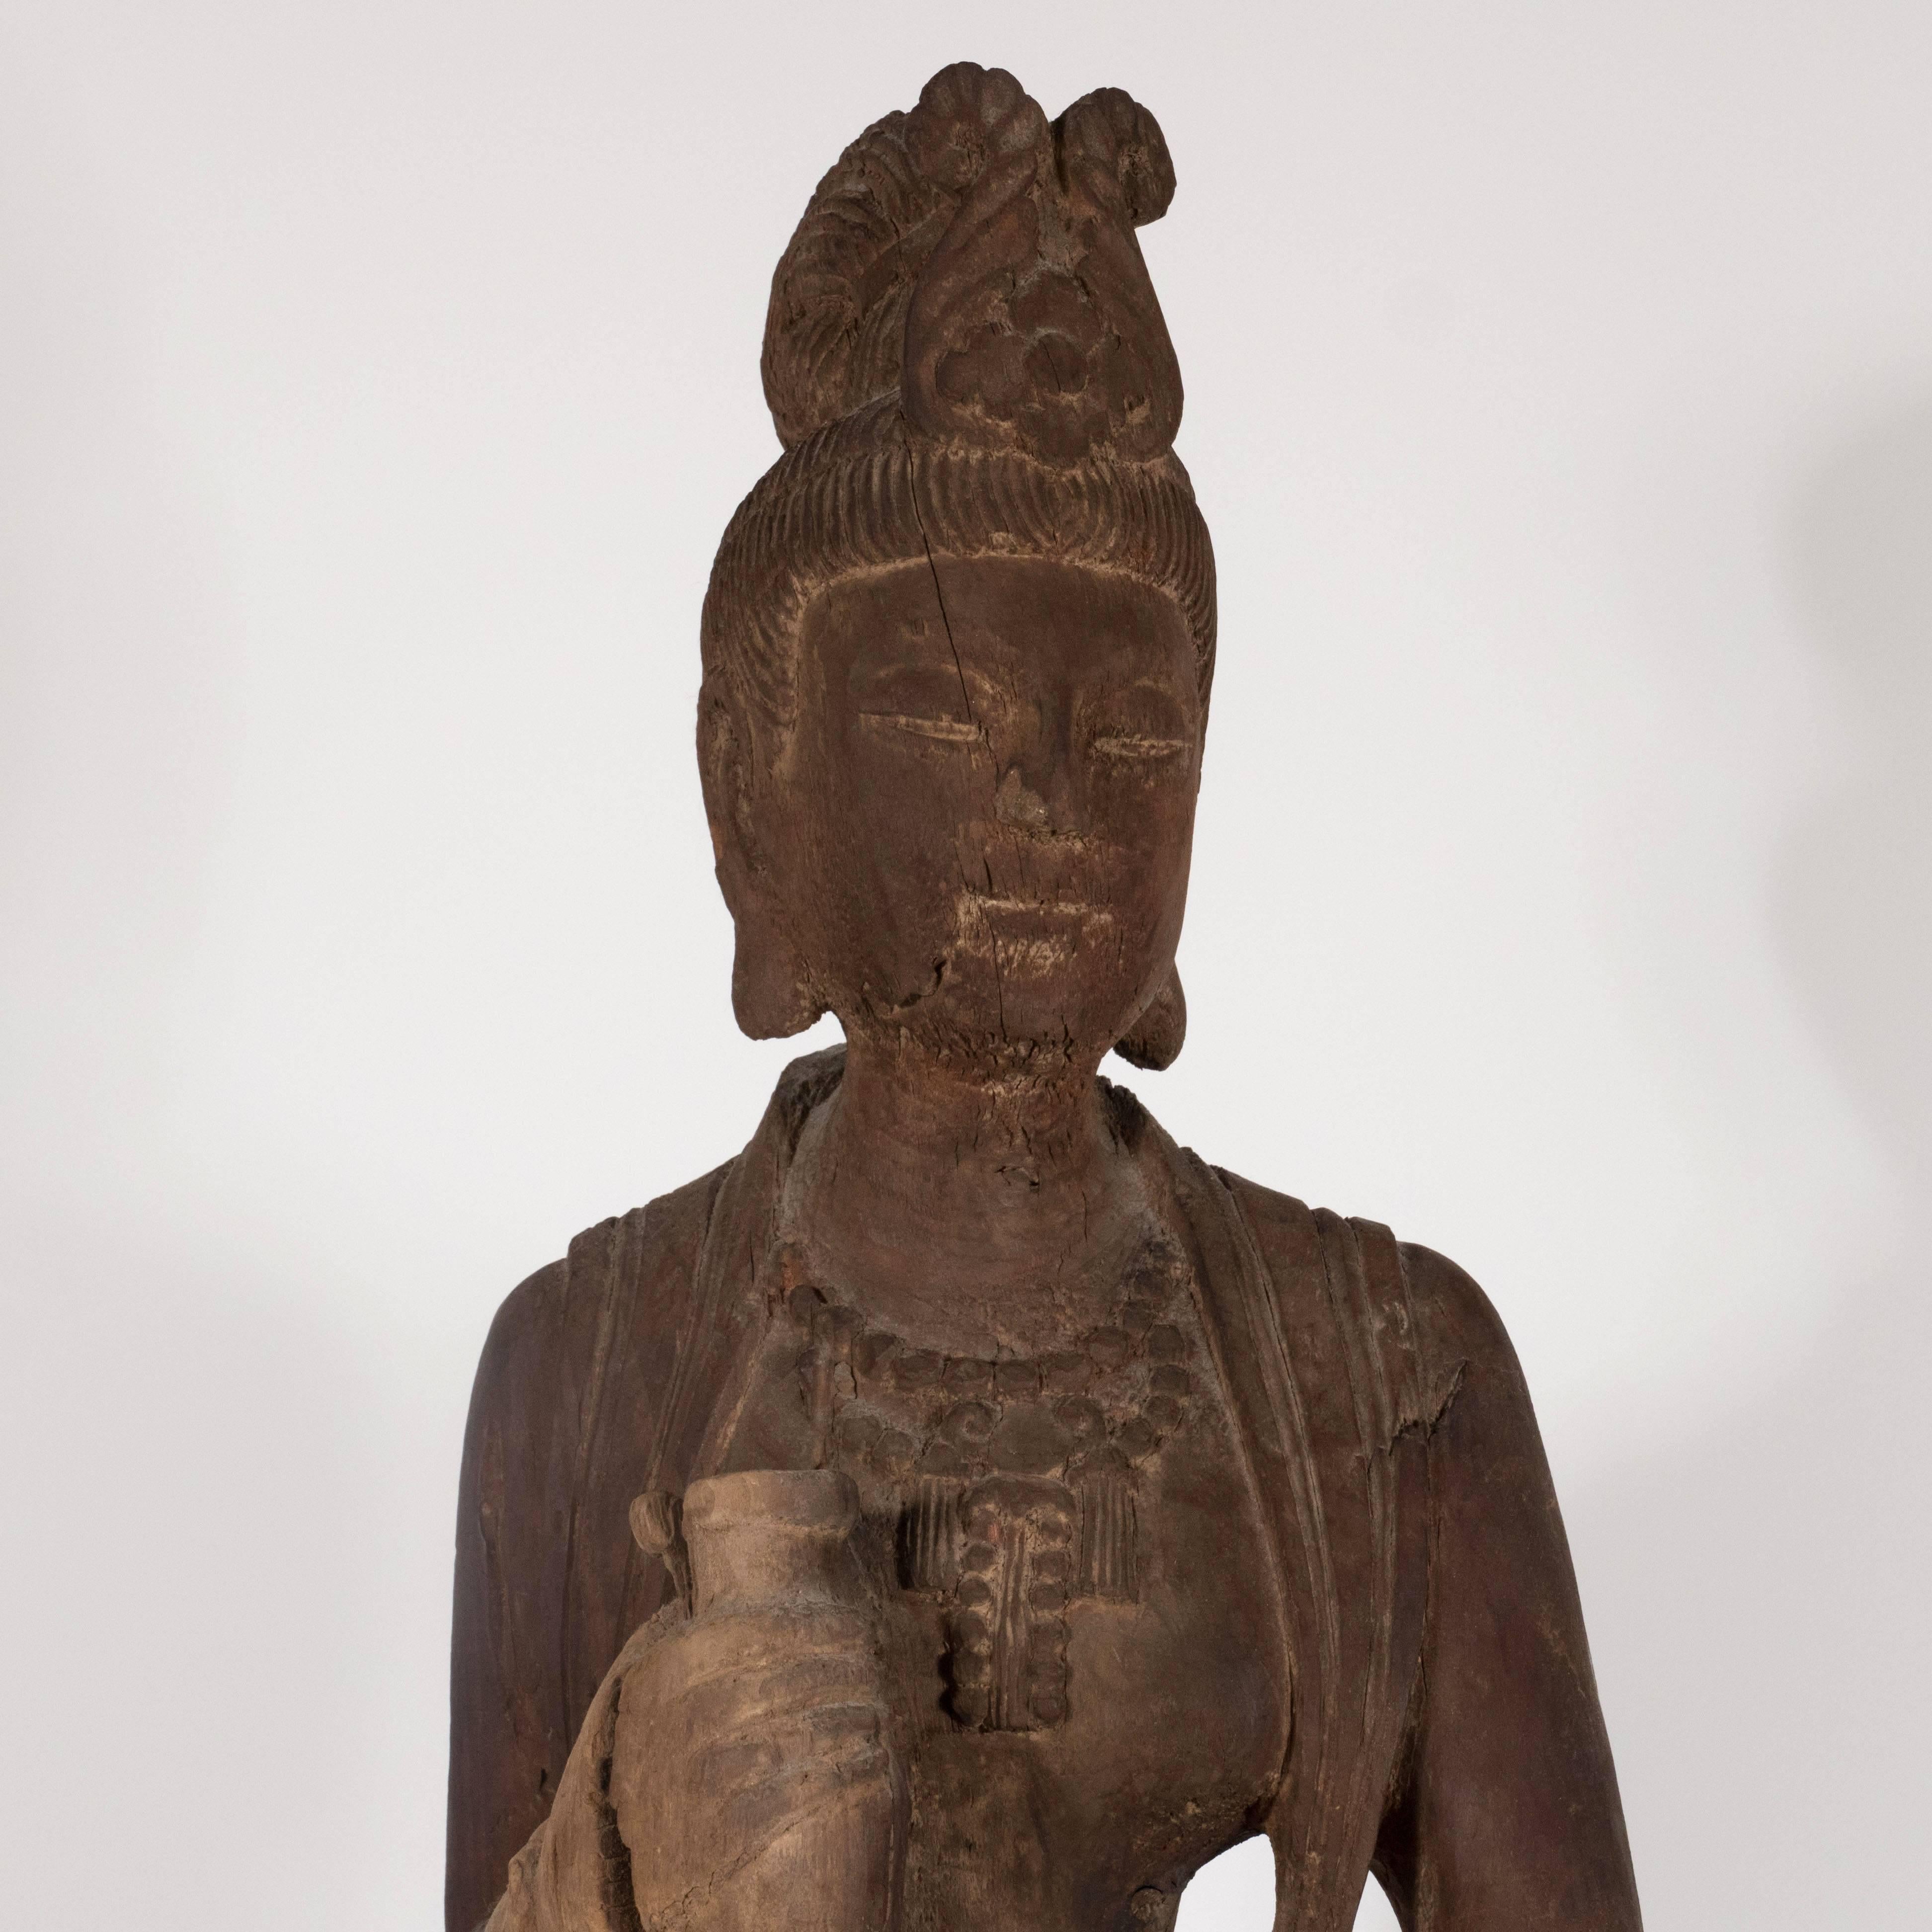 This beautiful sculpture realized in China in the 18th century depicts Guanyin, a Bodhisattva associated with compassion. The female form holds a pot in her hands. She appears draped in a long flowing dress with a tiara- the many details of her